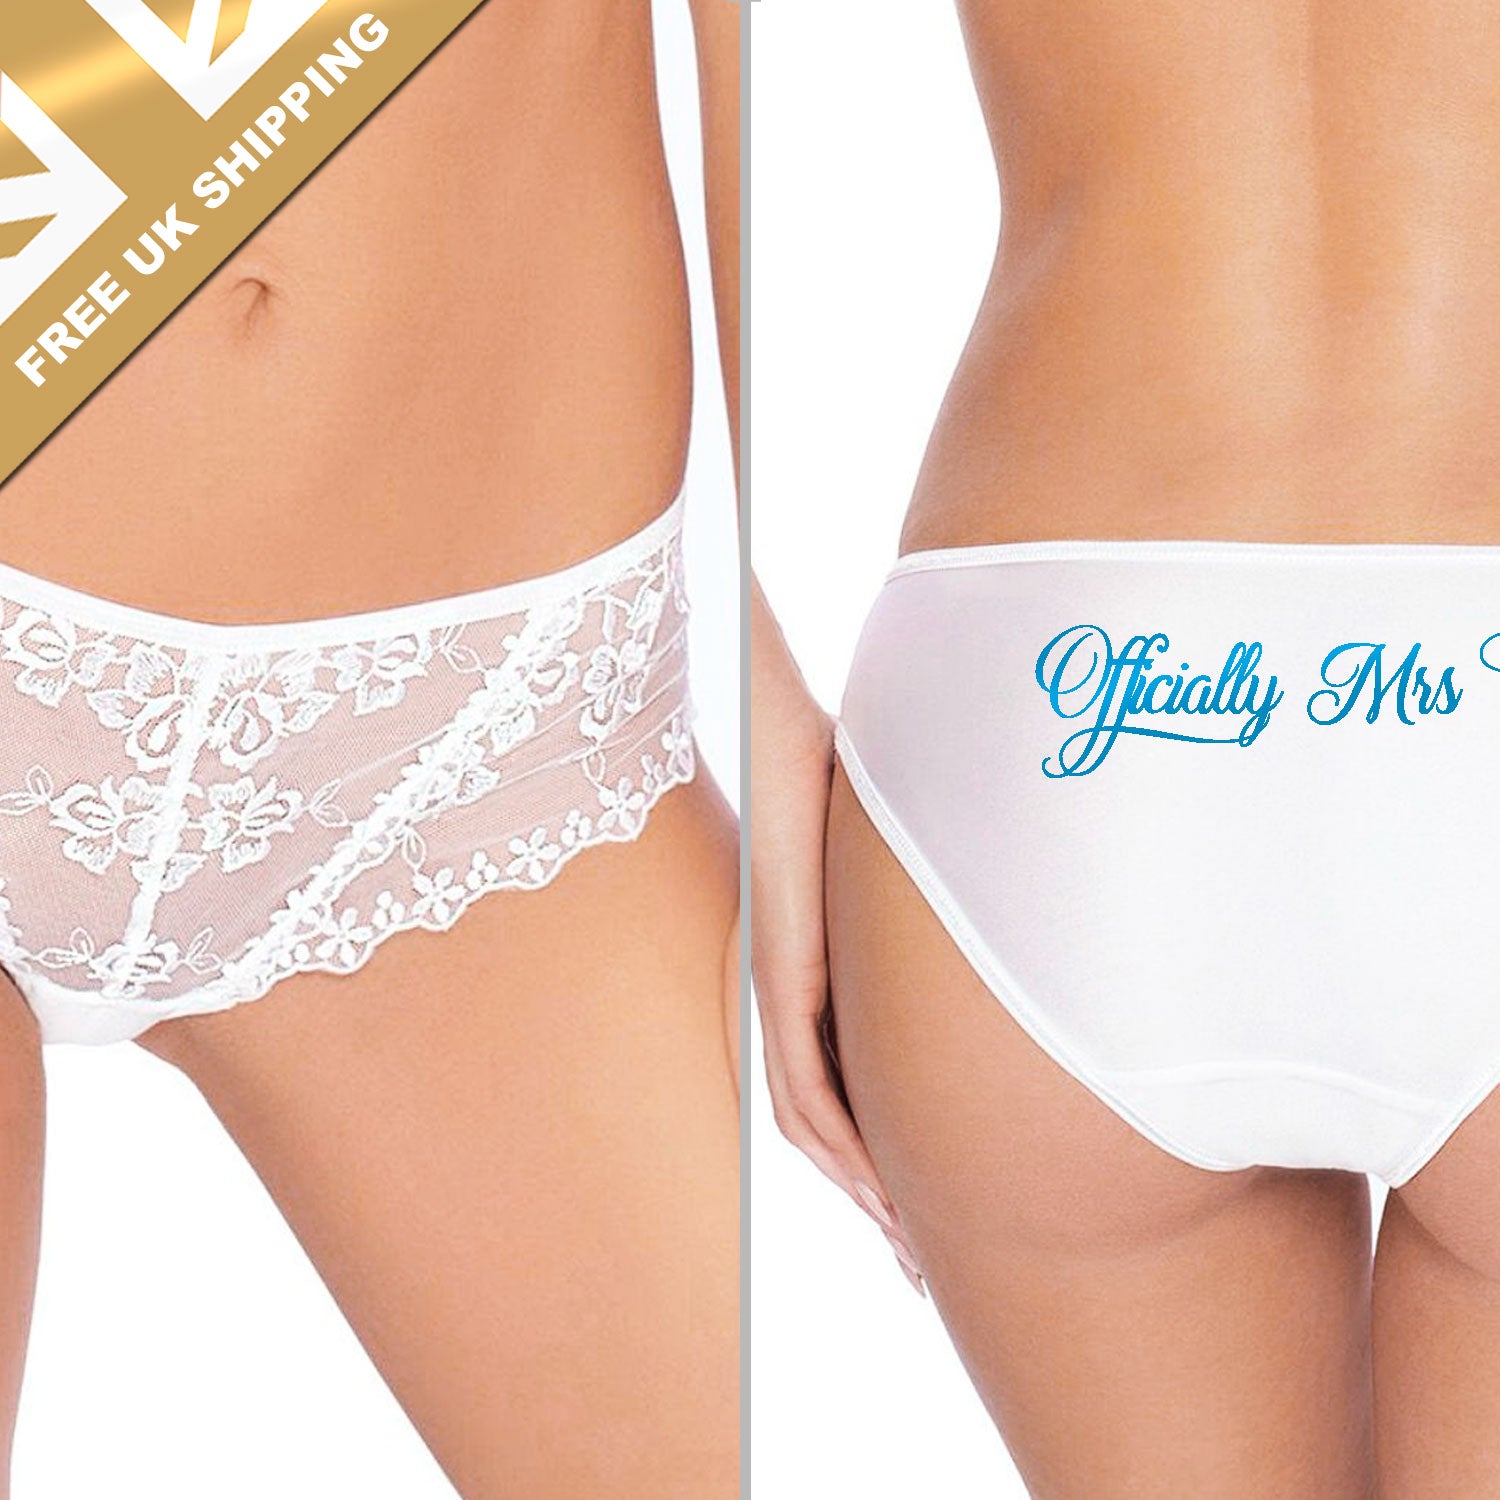 Personalised White Bride Briefs - FREE UK SHIPPING – Give a Gift